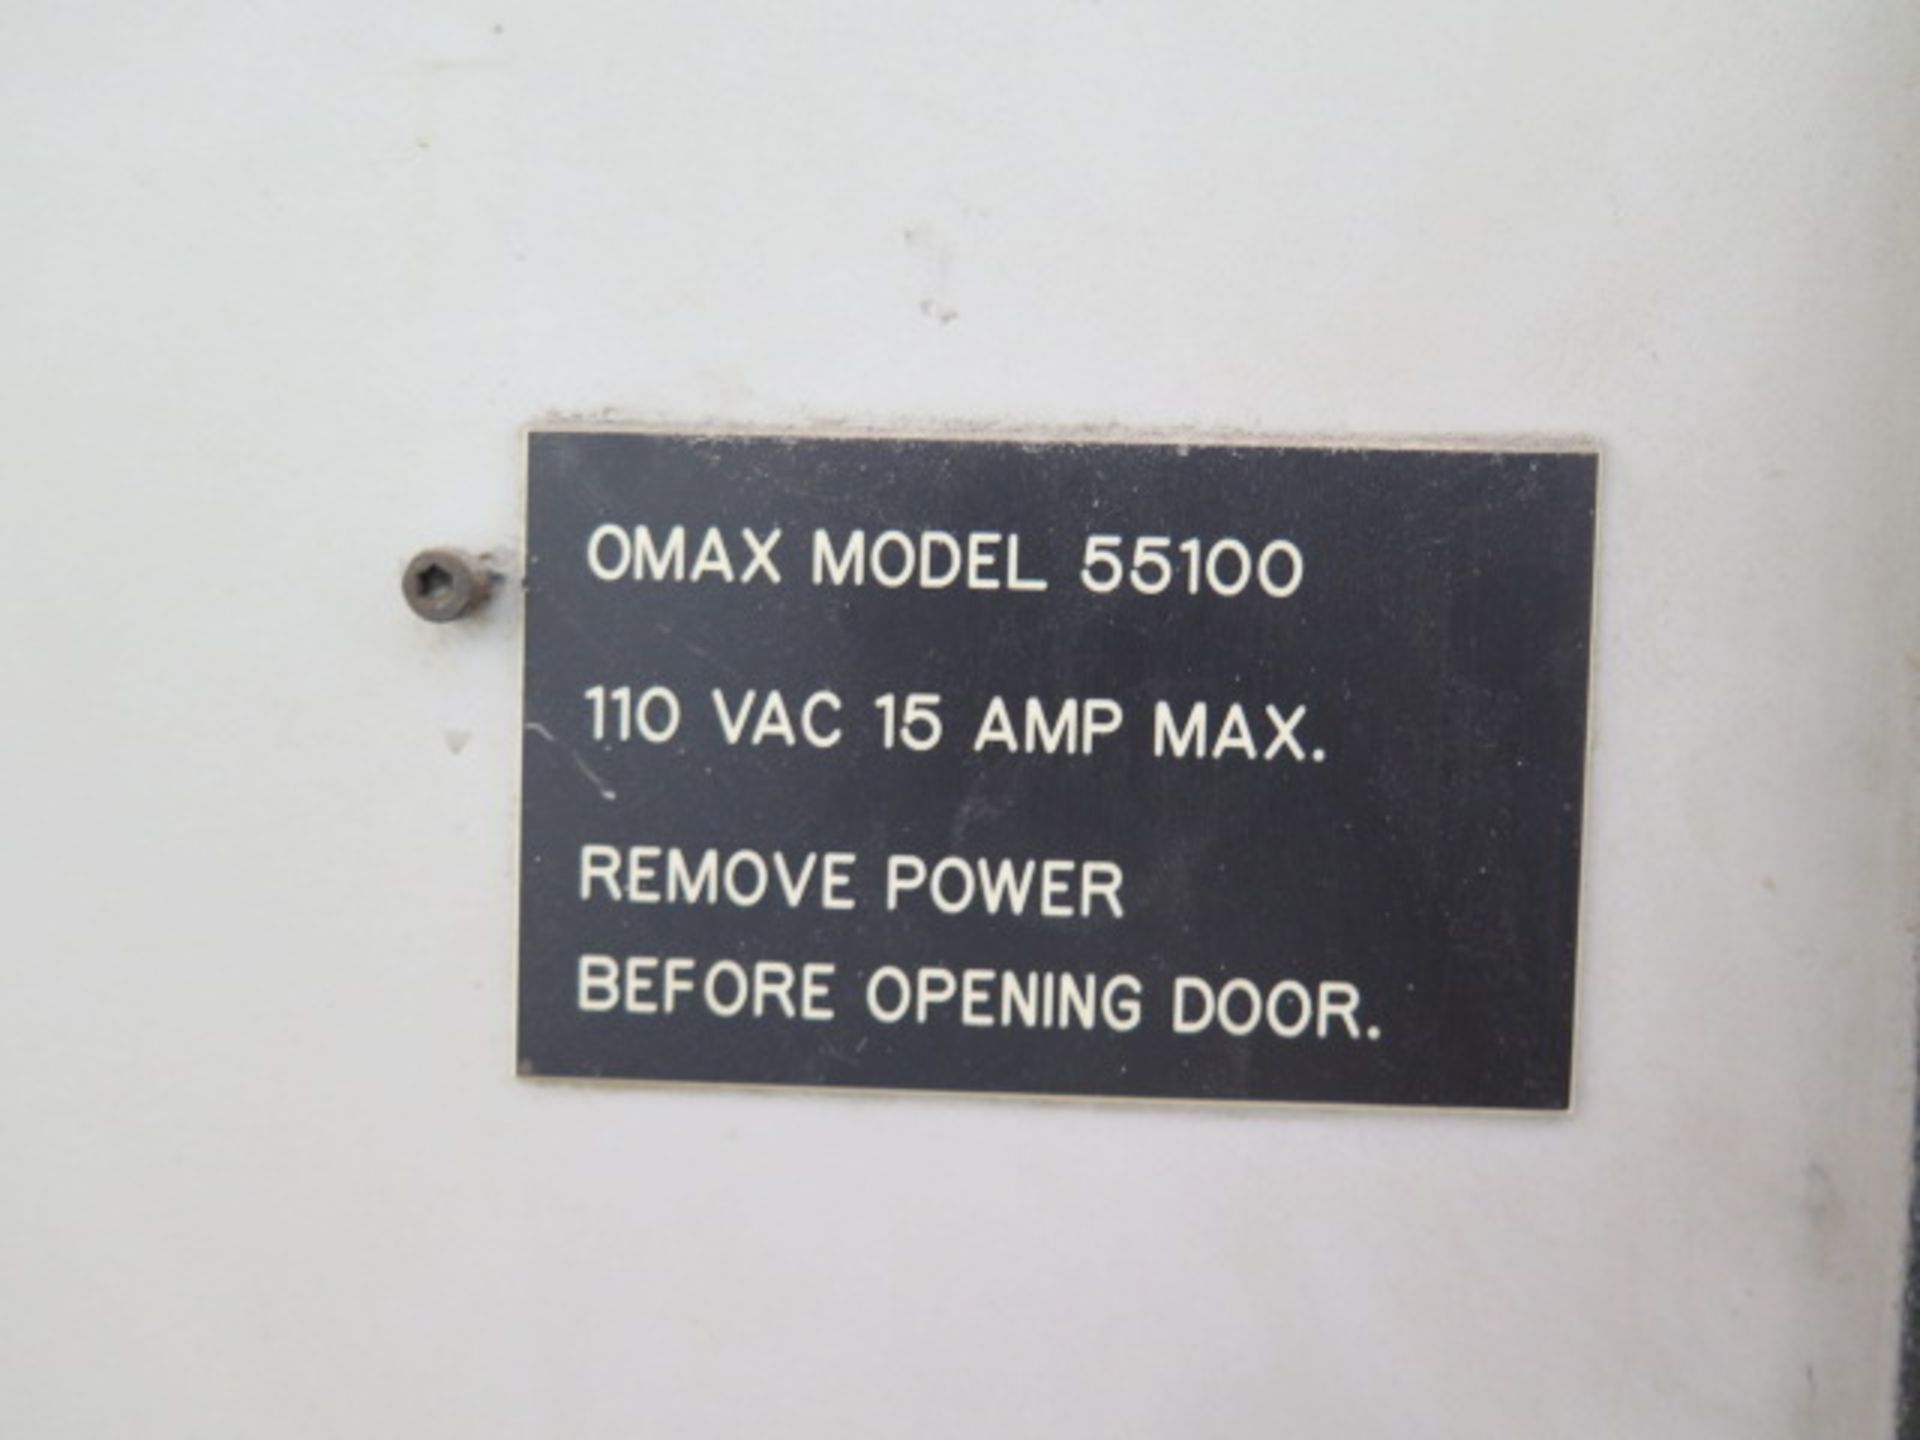 Omax mdl. 55100 5’ x 10’ CNC WaterJet Machine s/n B511750 w/ Omax MAKE Precision Velocity,SOLD AS IS - Image 12 of 24